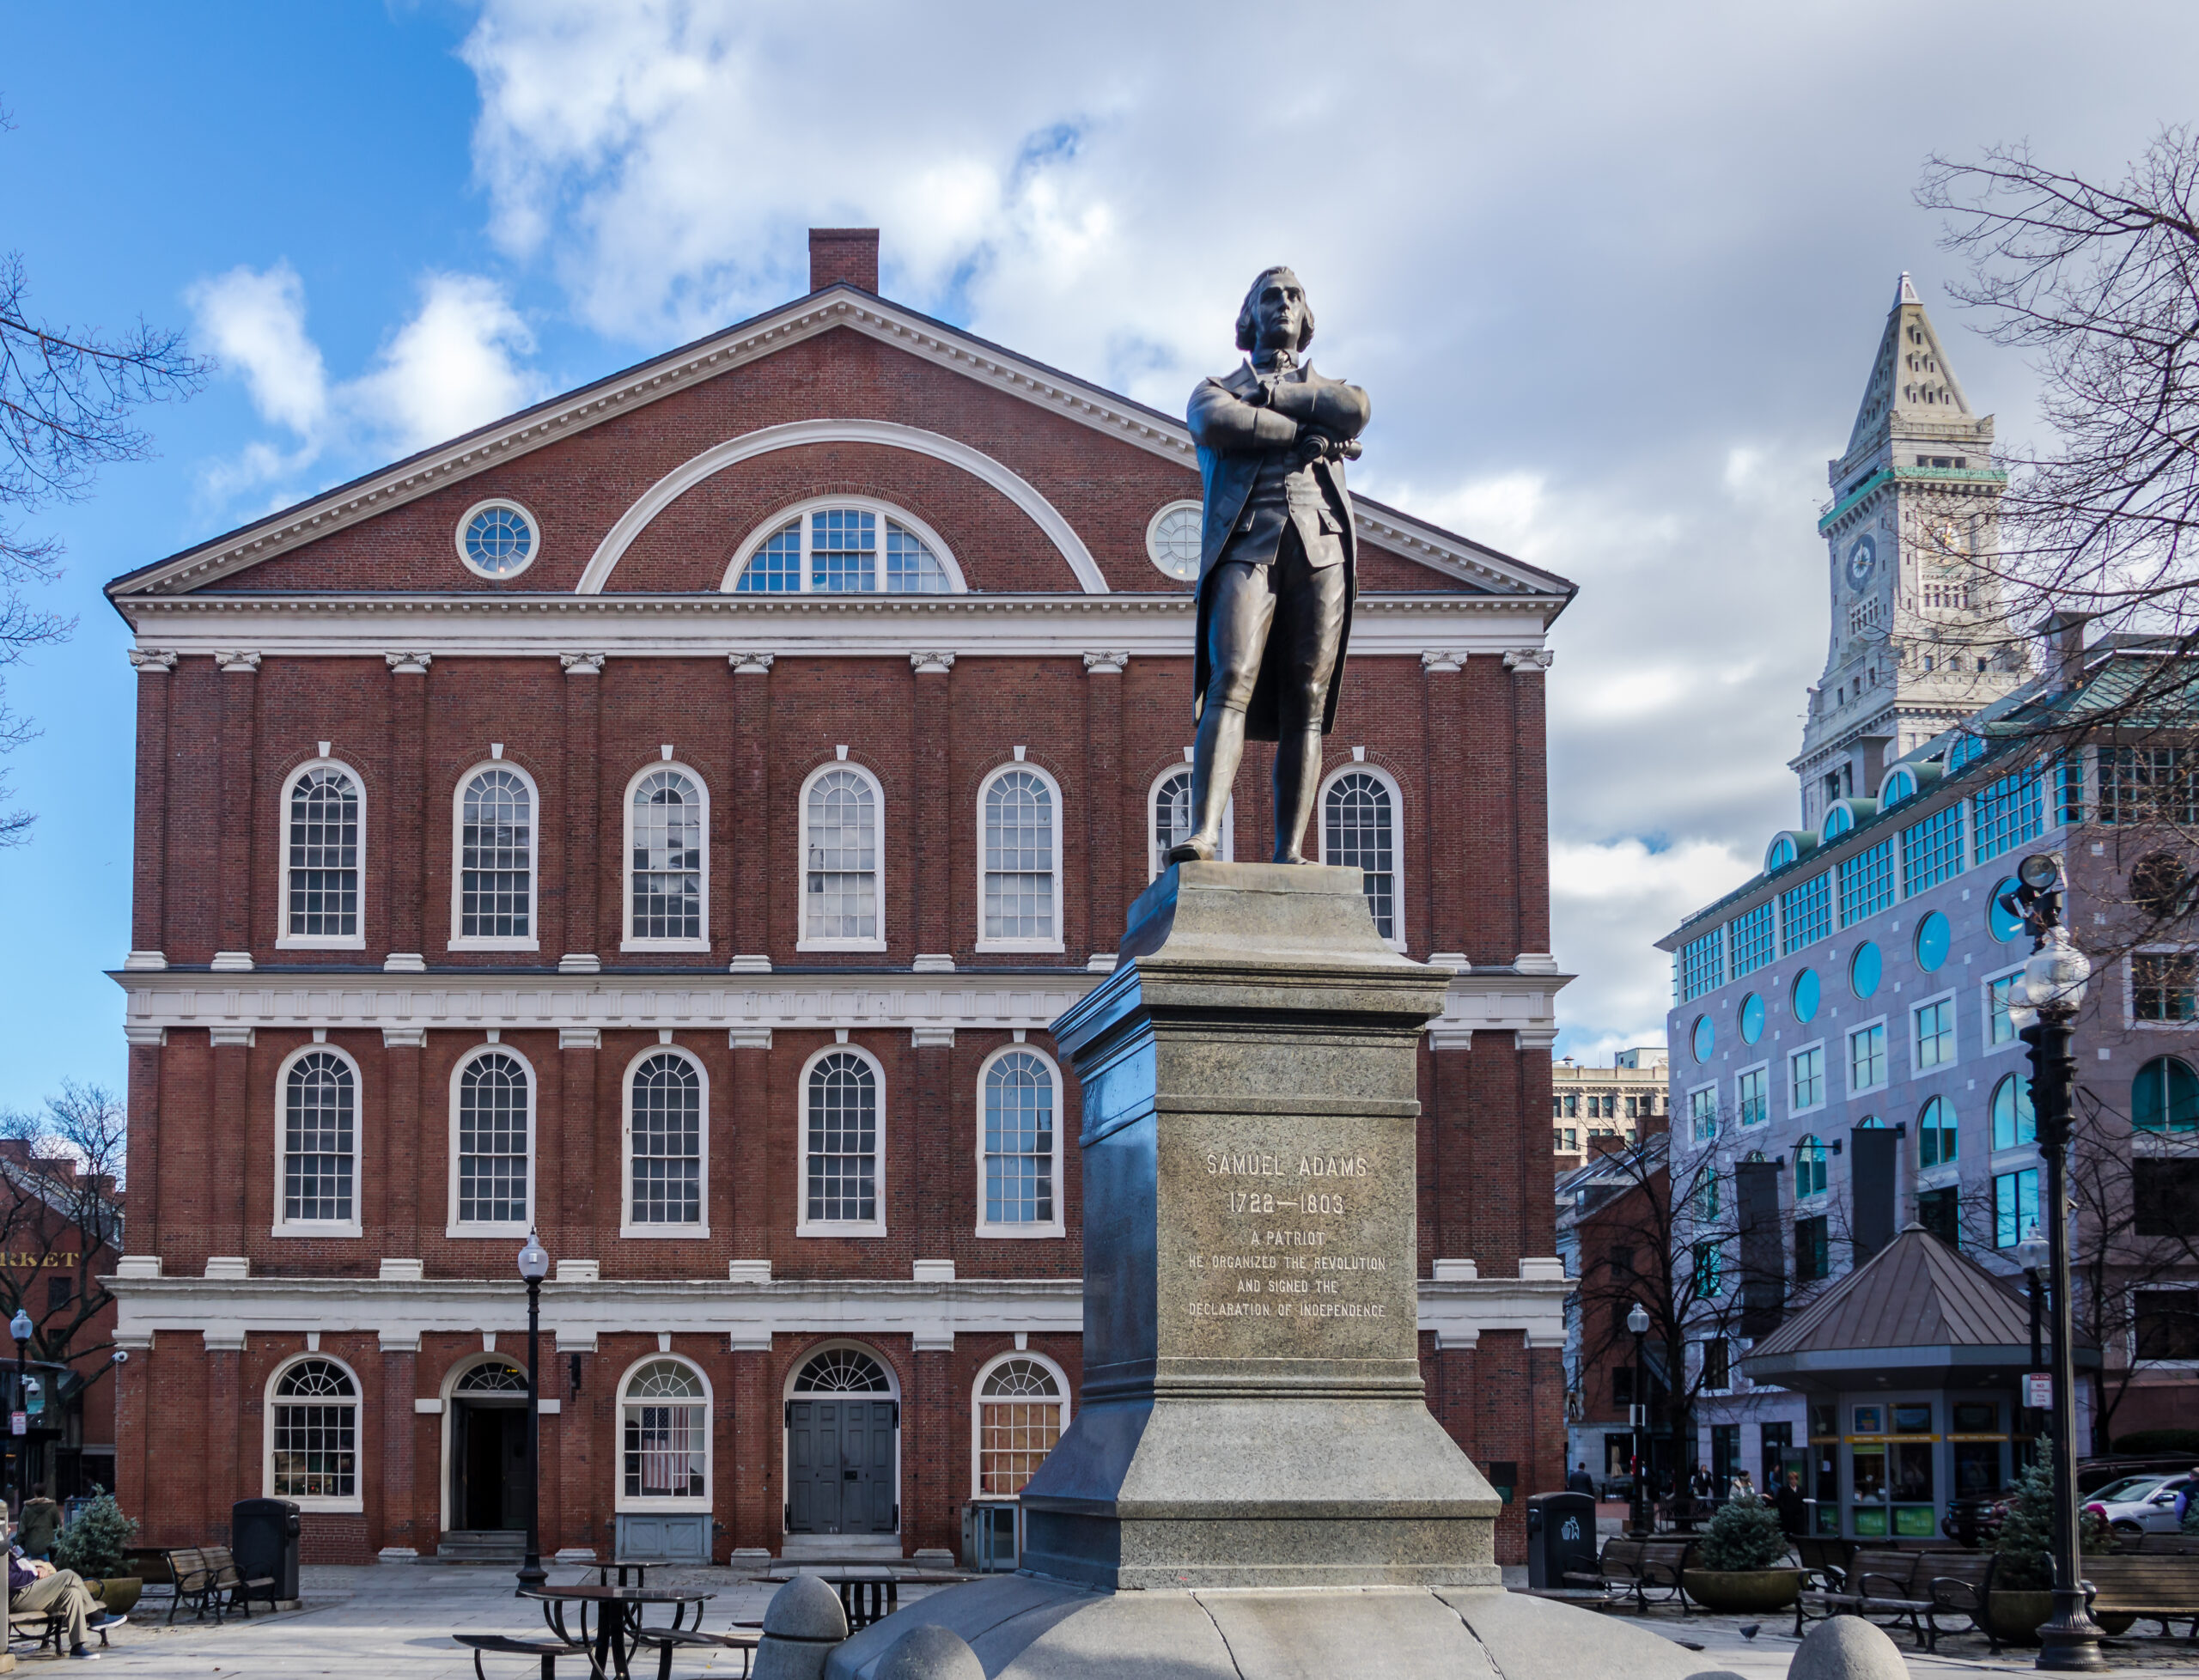 Faneuil Hall on Freedom Trail